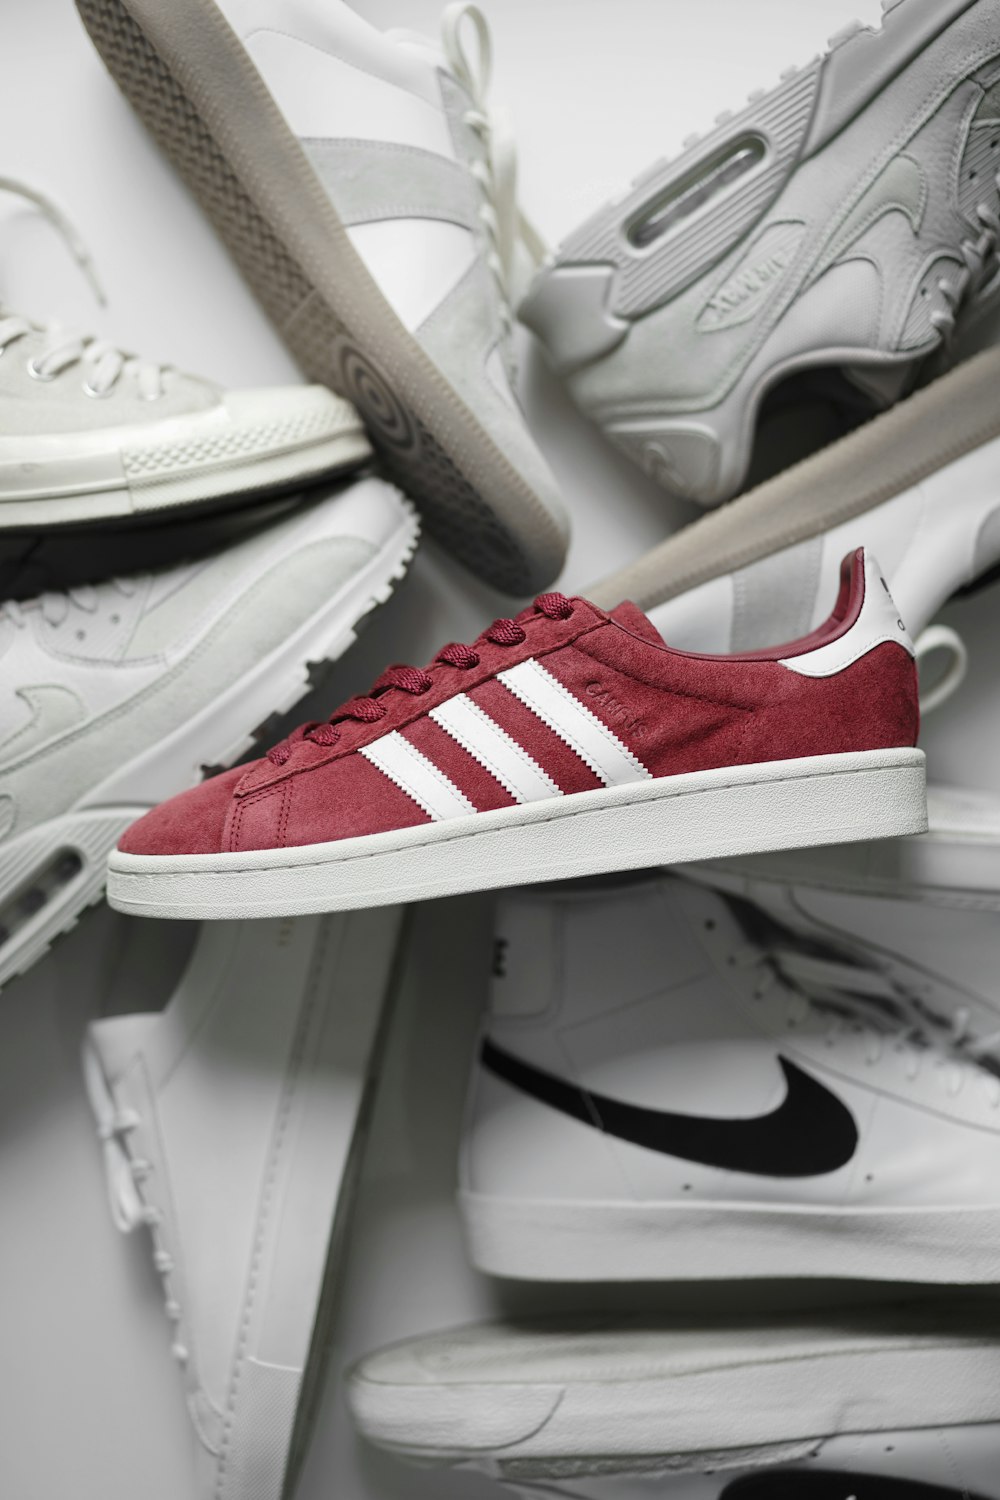 red and white adidas low top sneakers photo – Free Image on Unsplash